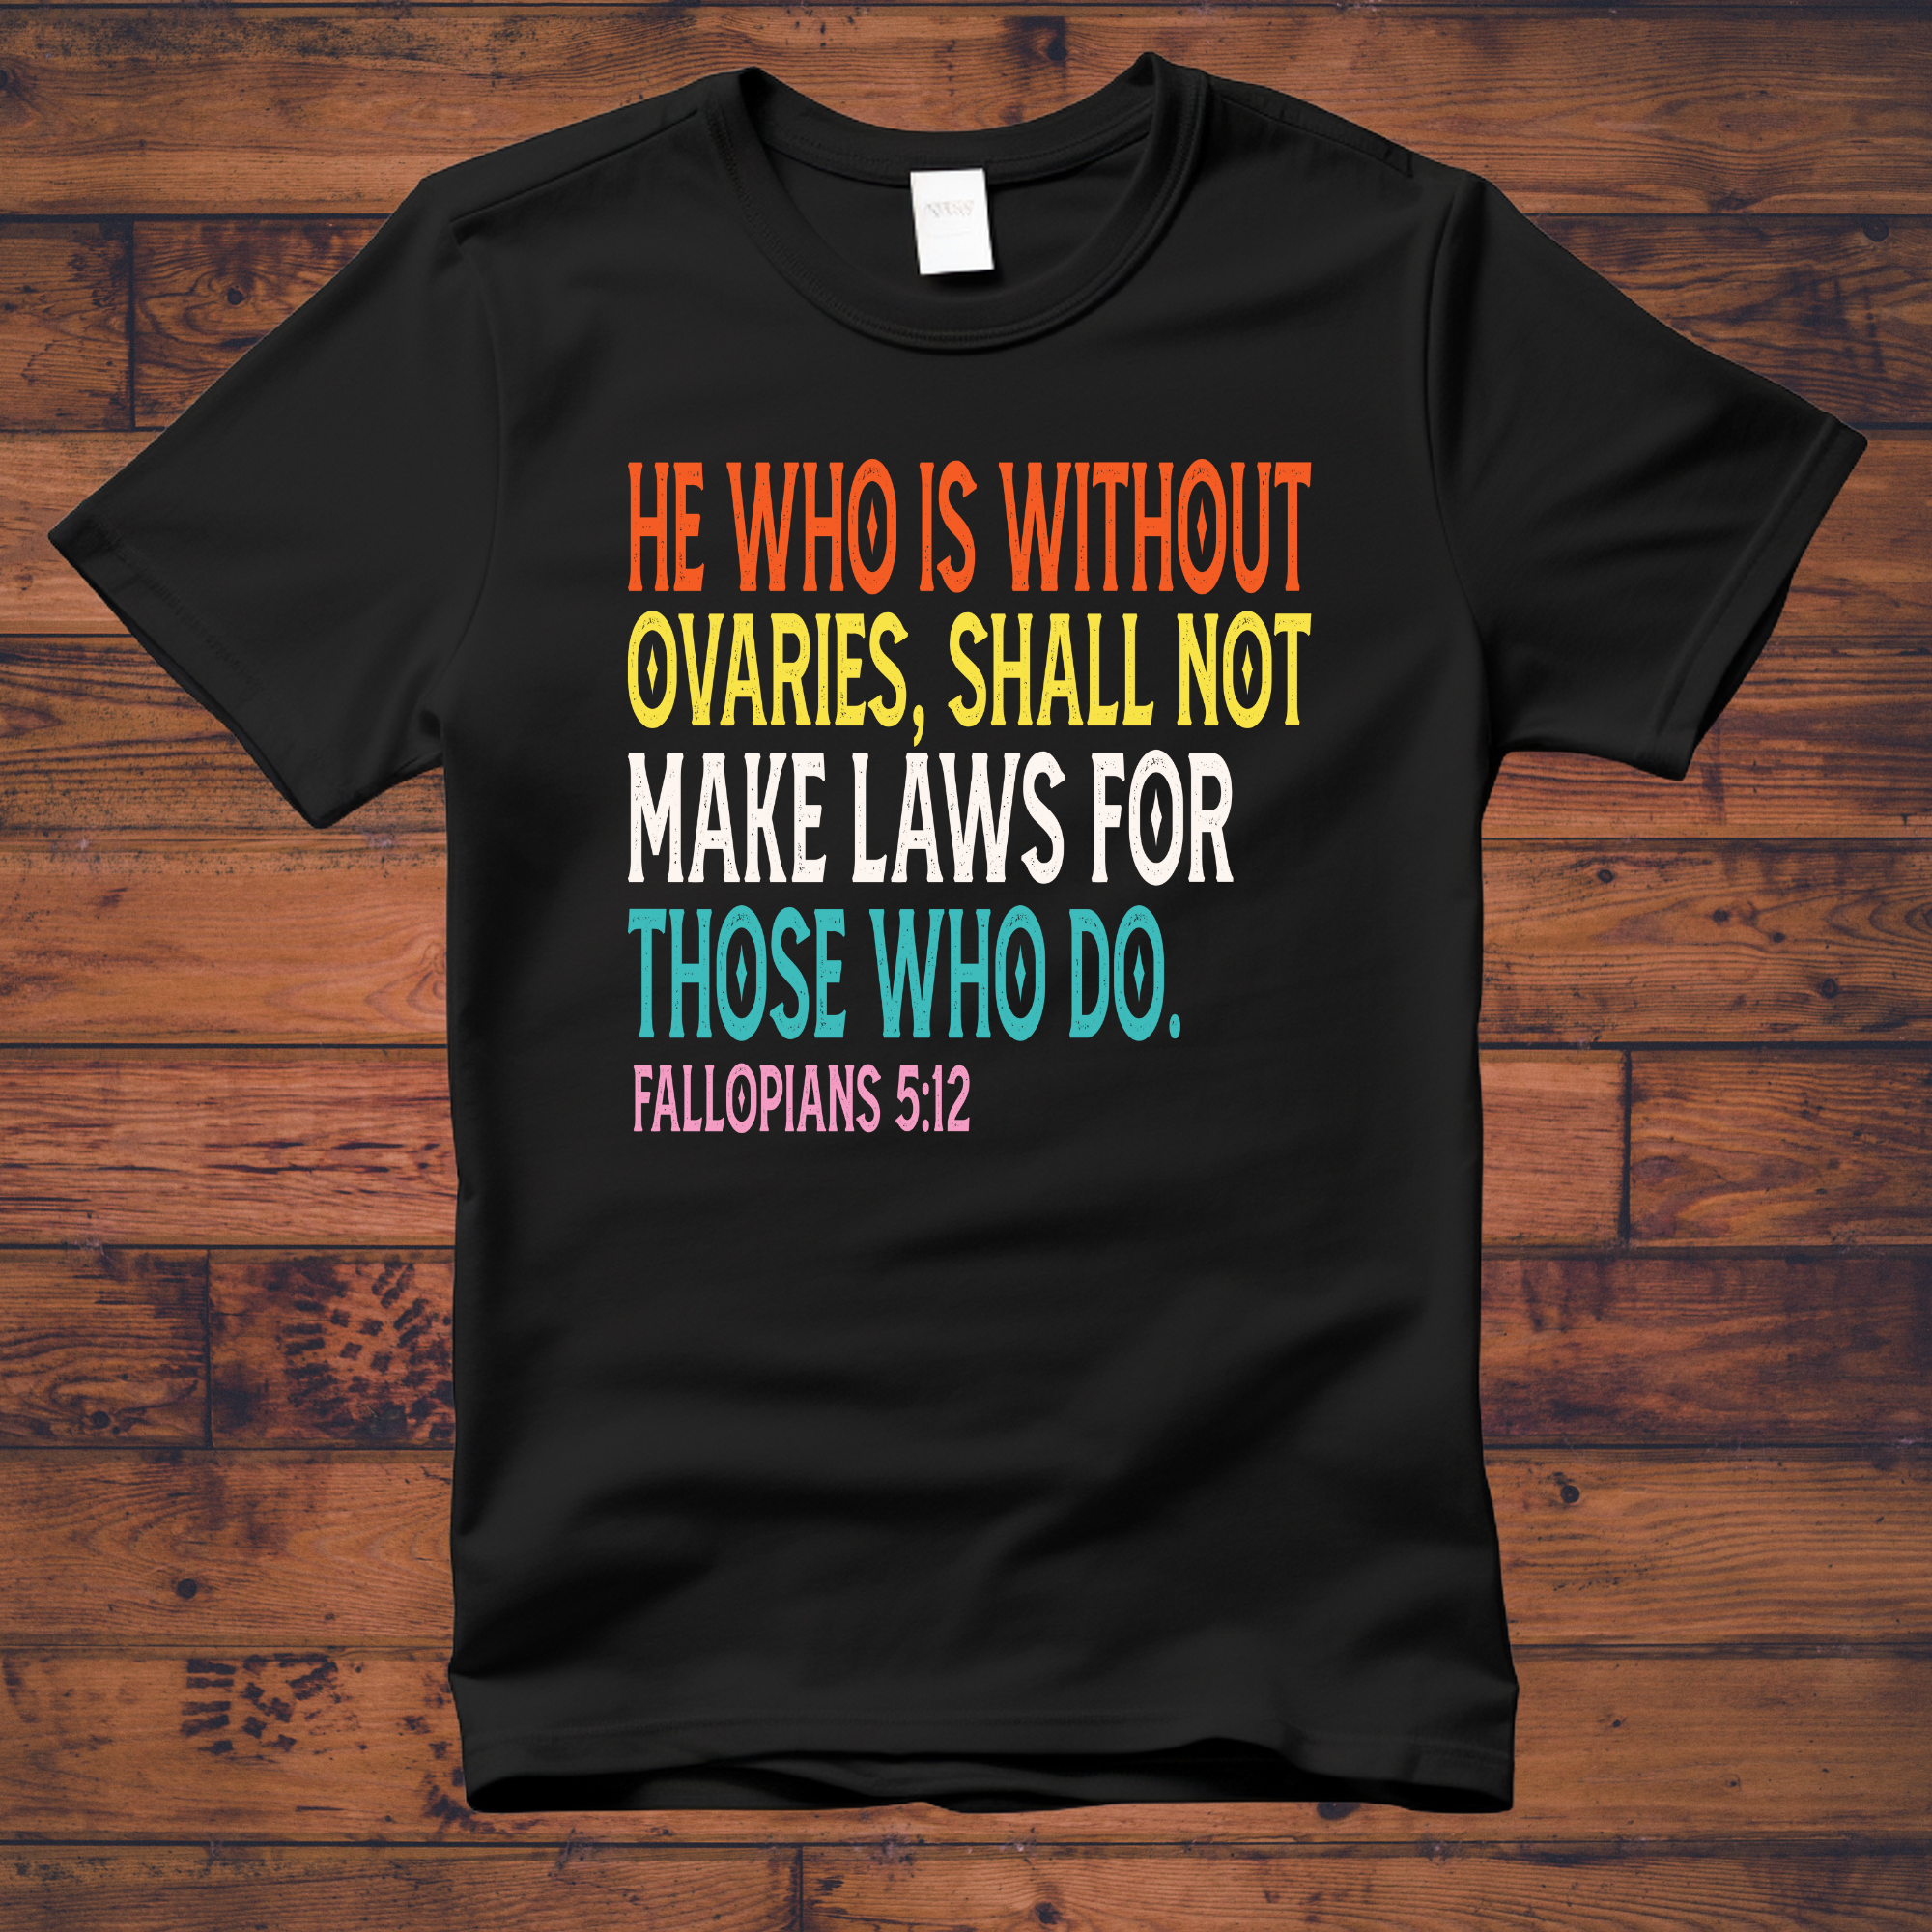 He who is without ovaries | Women’s Rights Tee